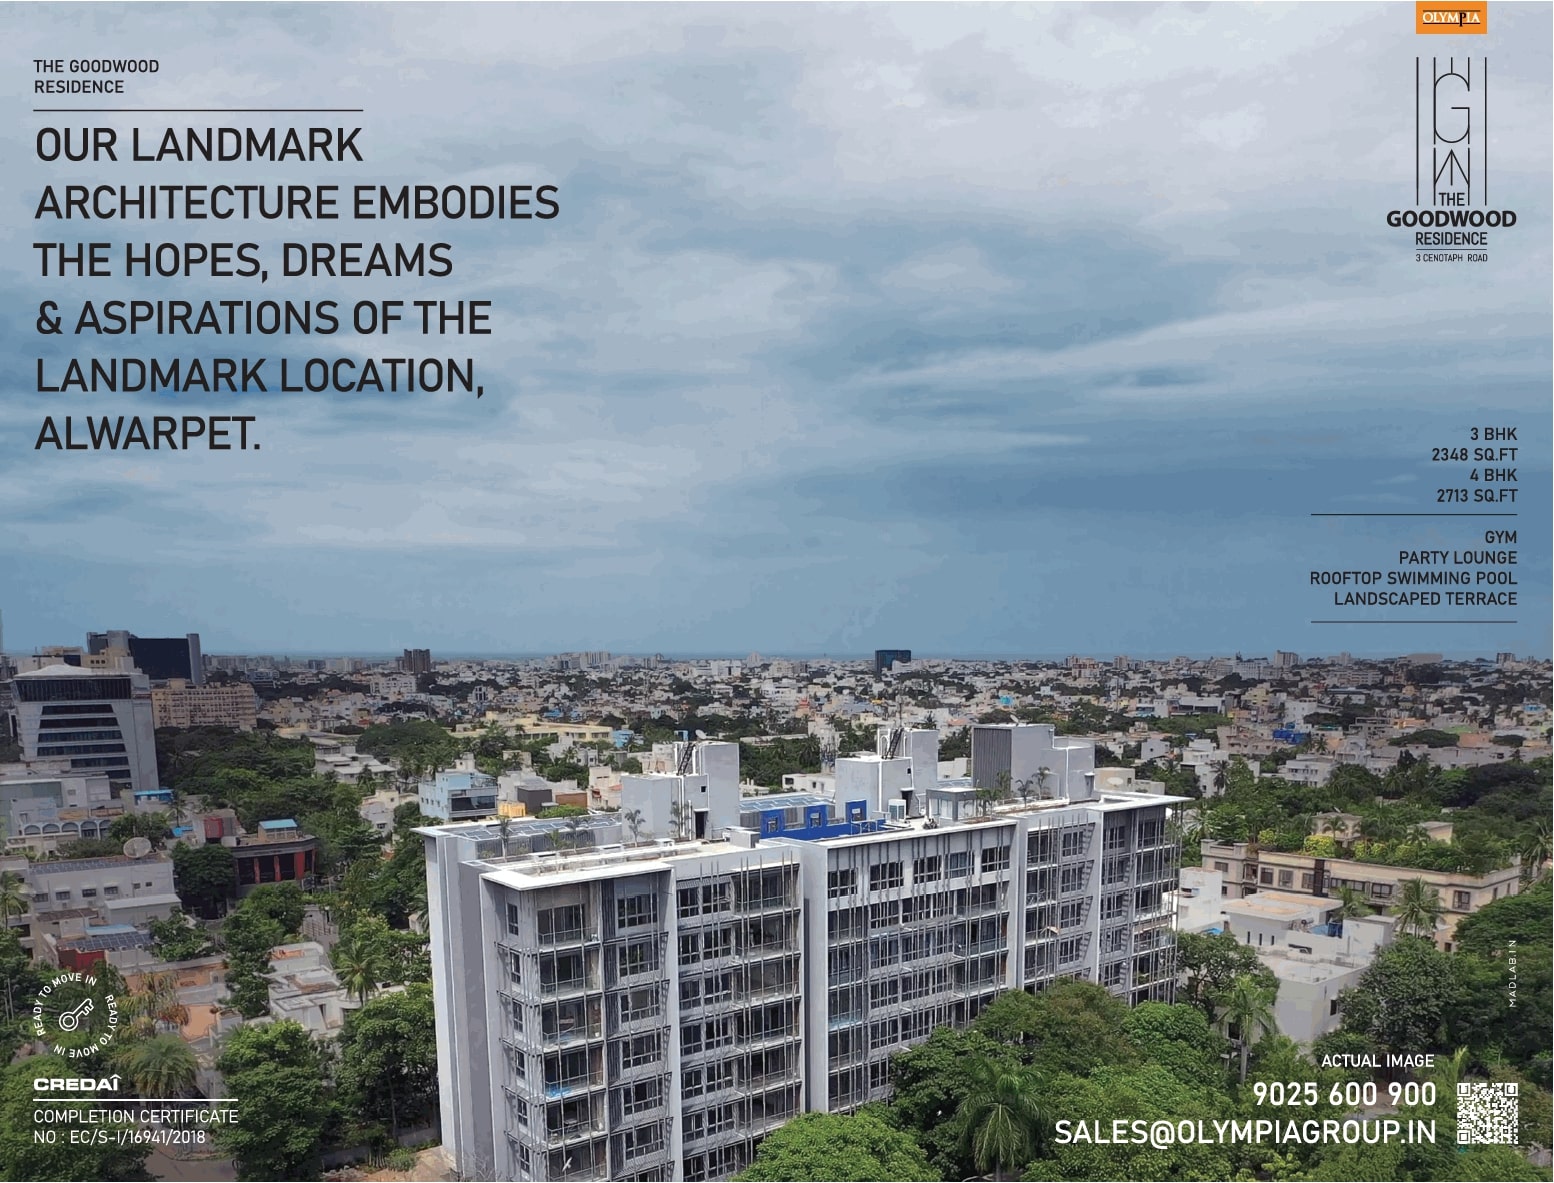 credai-the-goodwood-residence-ad-property-times-chennai-30-01-2021